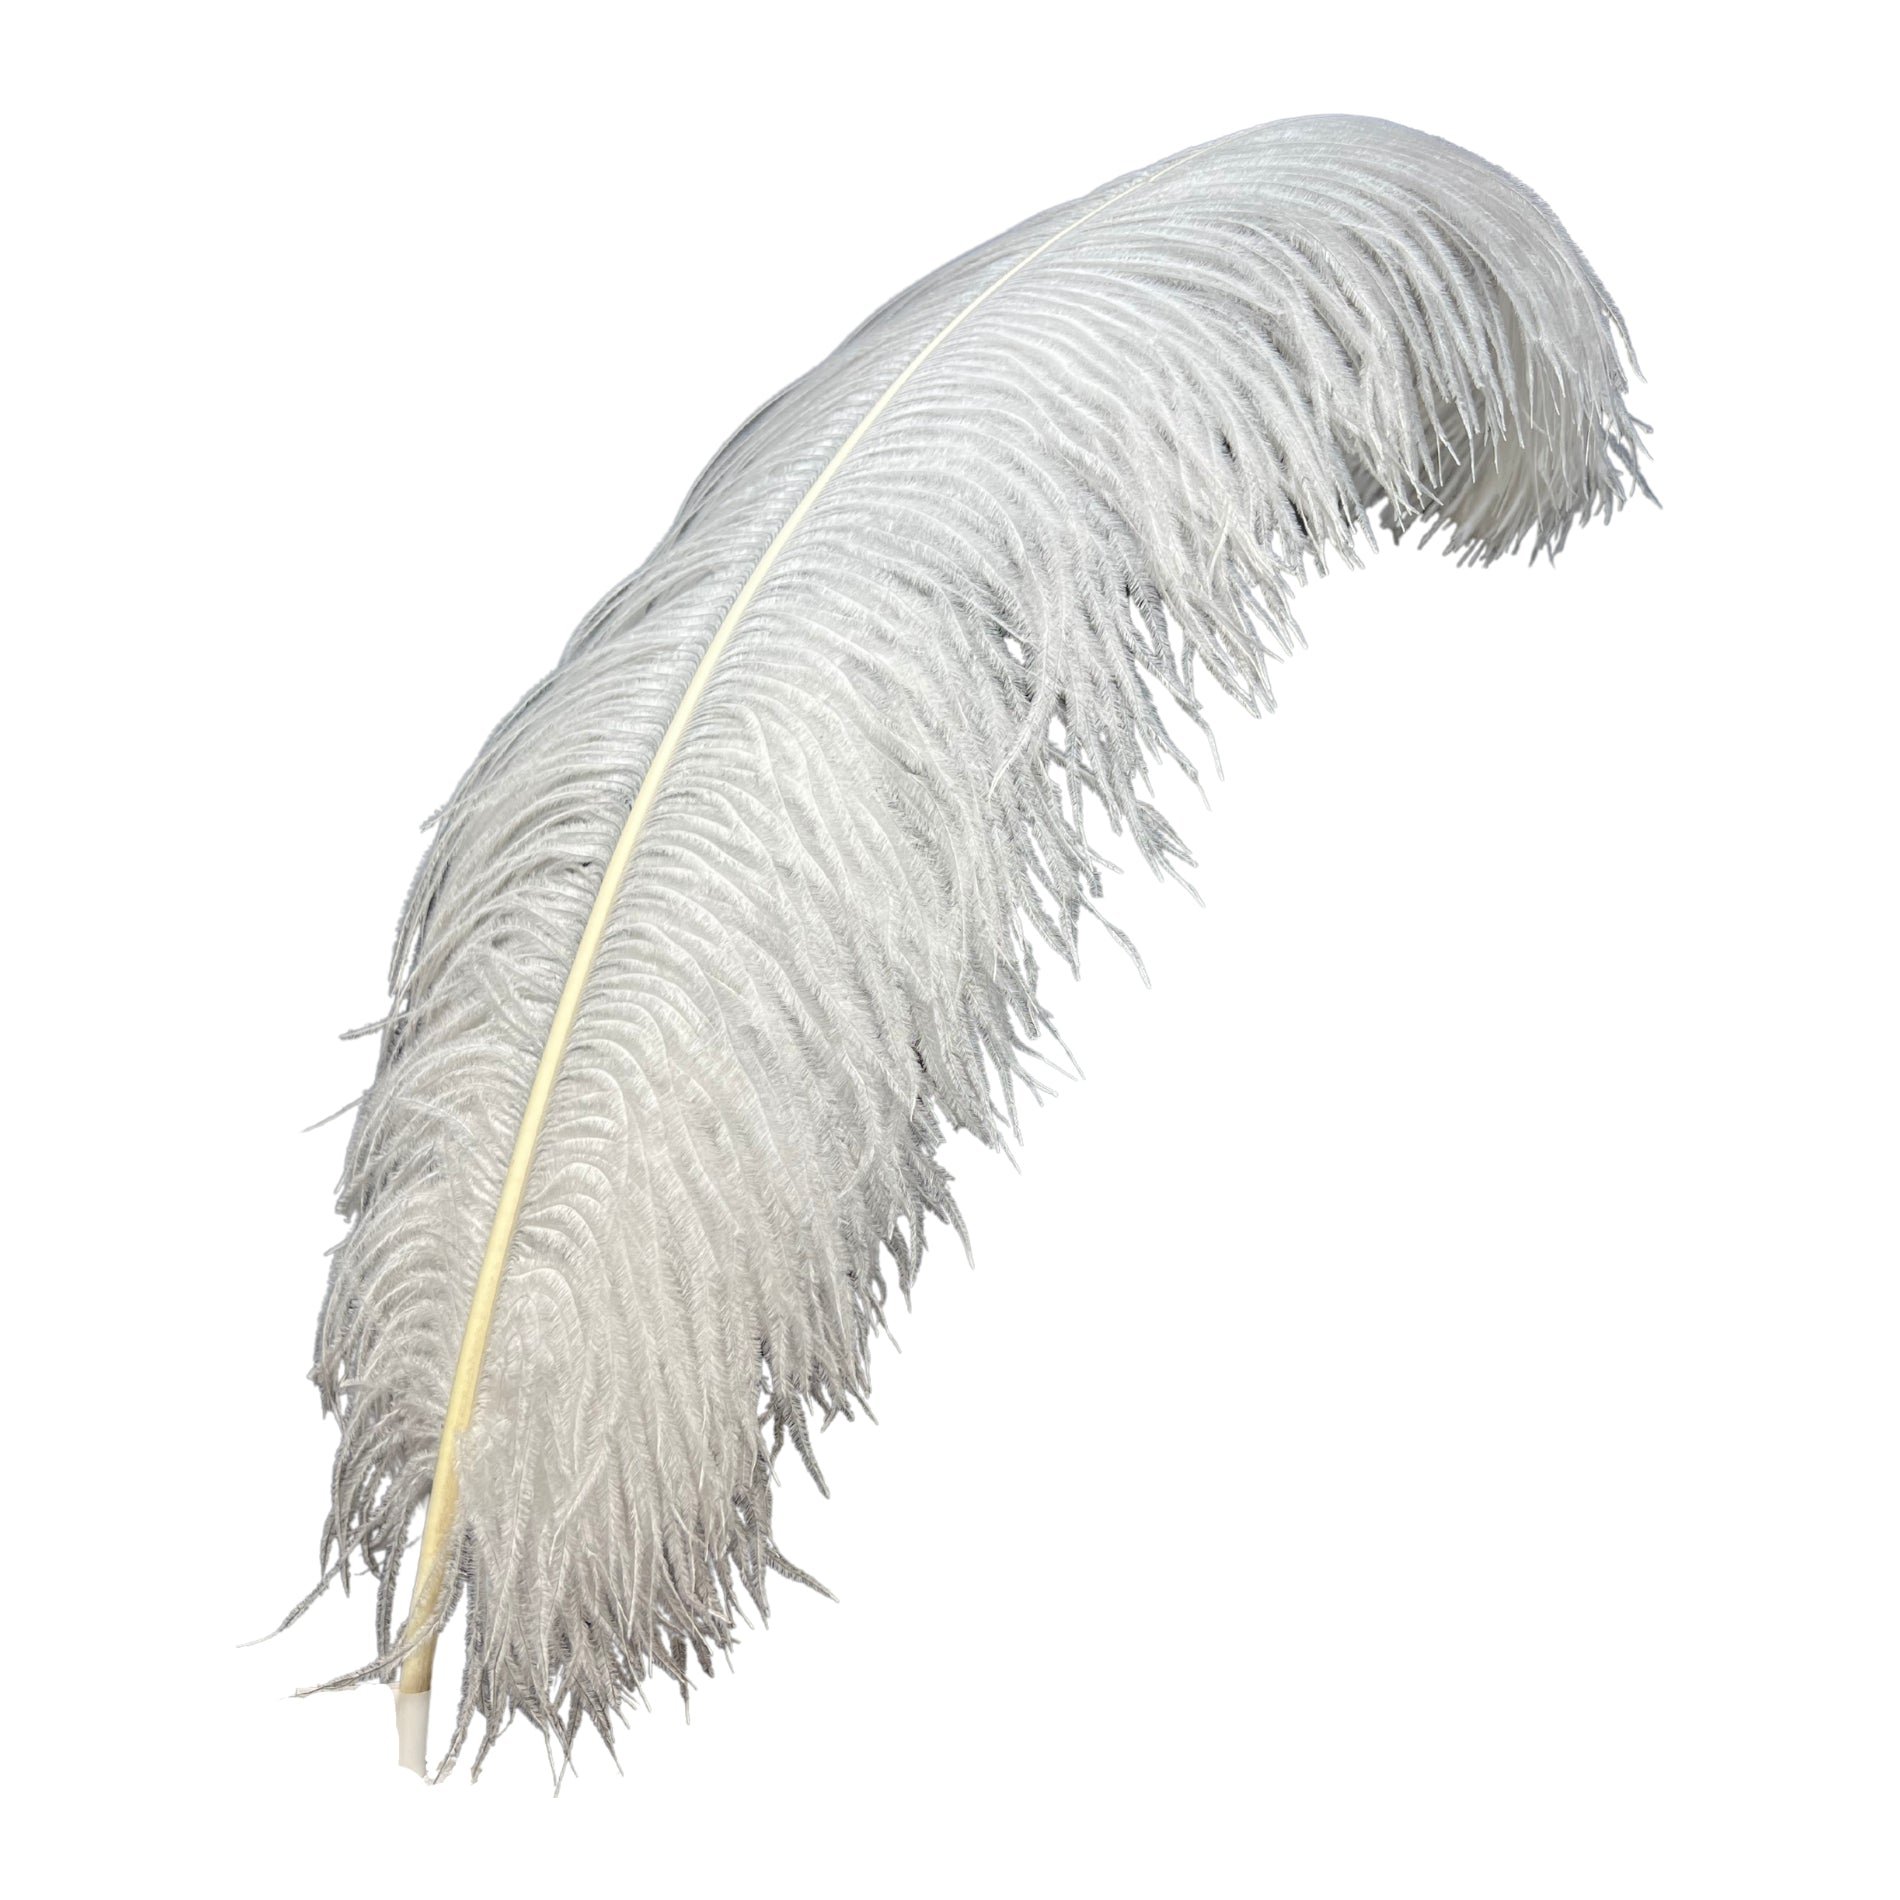 Cultural Significance And Symbolism of Ostrich Feathers